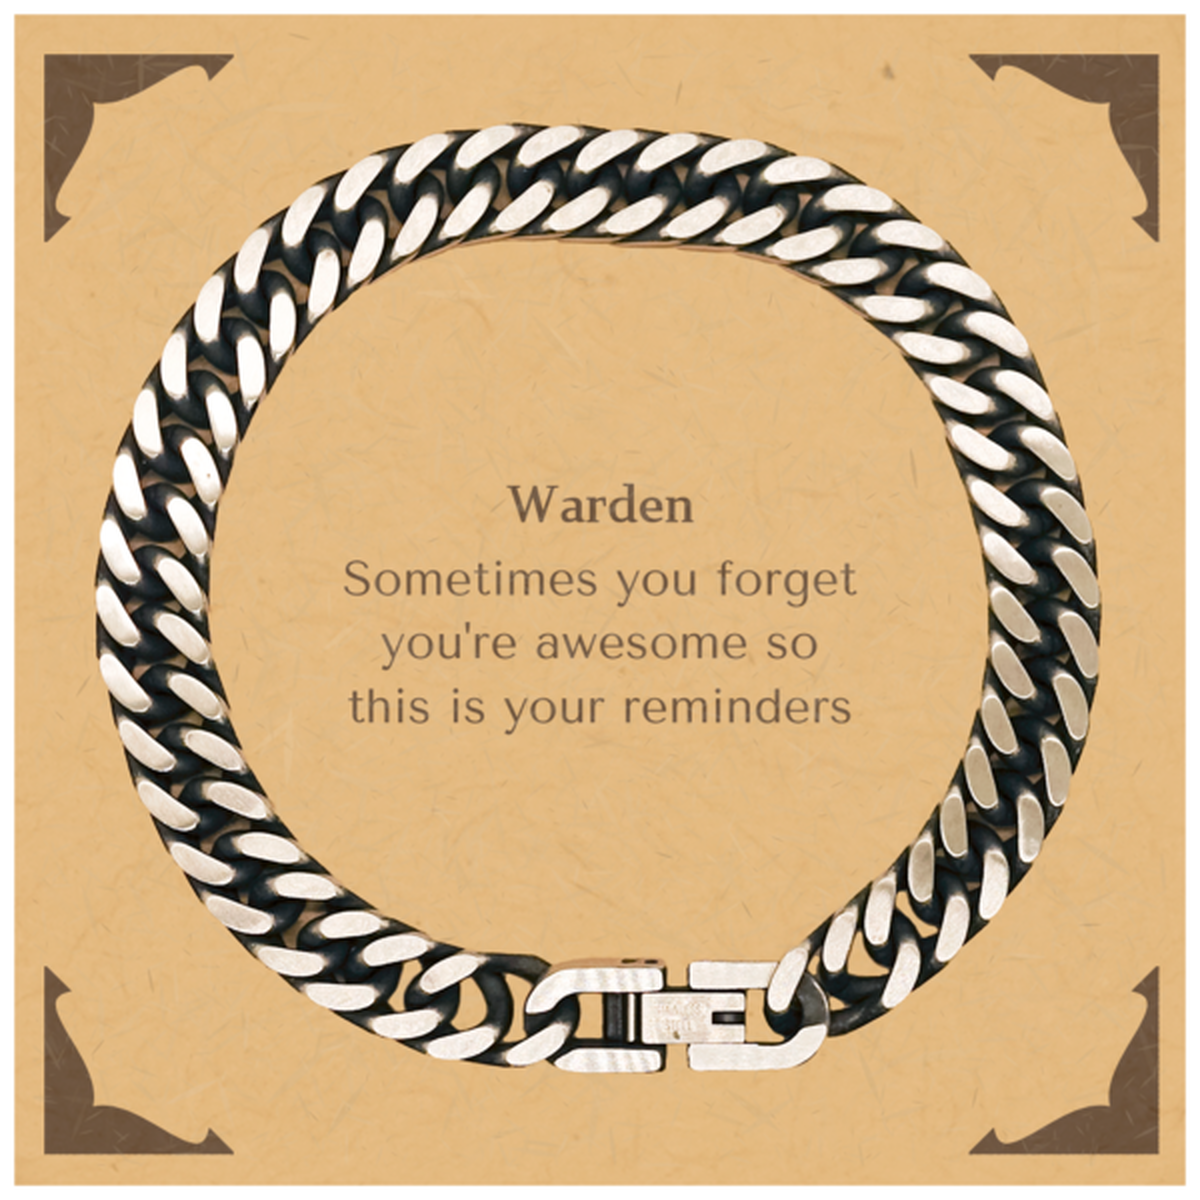 Sentimental Warden Cuban Link Chain Bracelet, Warden Sometimes you forget you're awesome so this is your reminders, Graduation Christmas Birthday Gifts for Warden, Men, Women, Coworkers